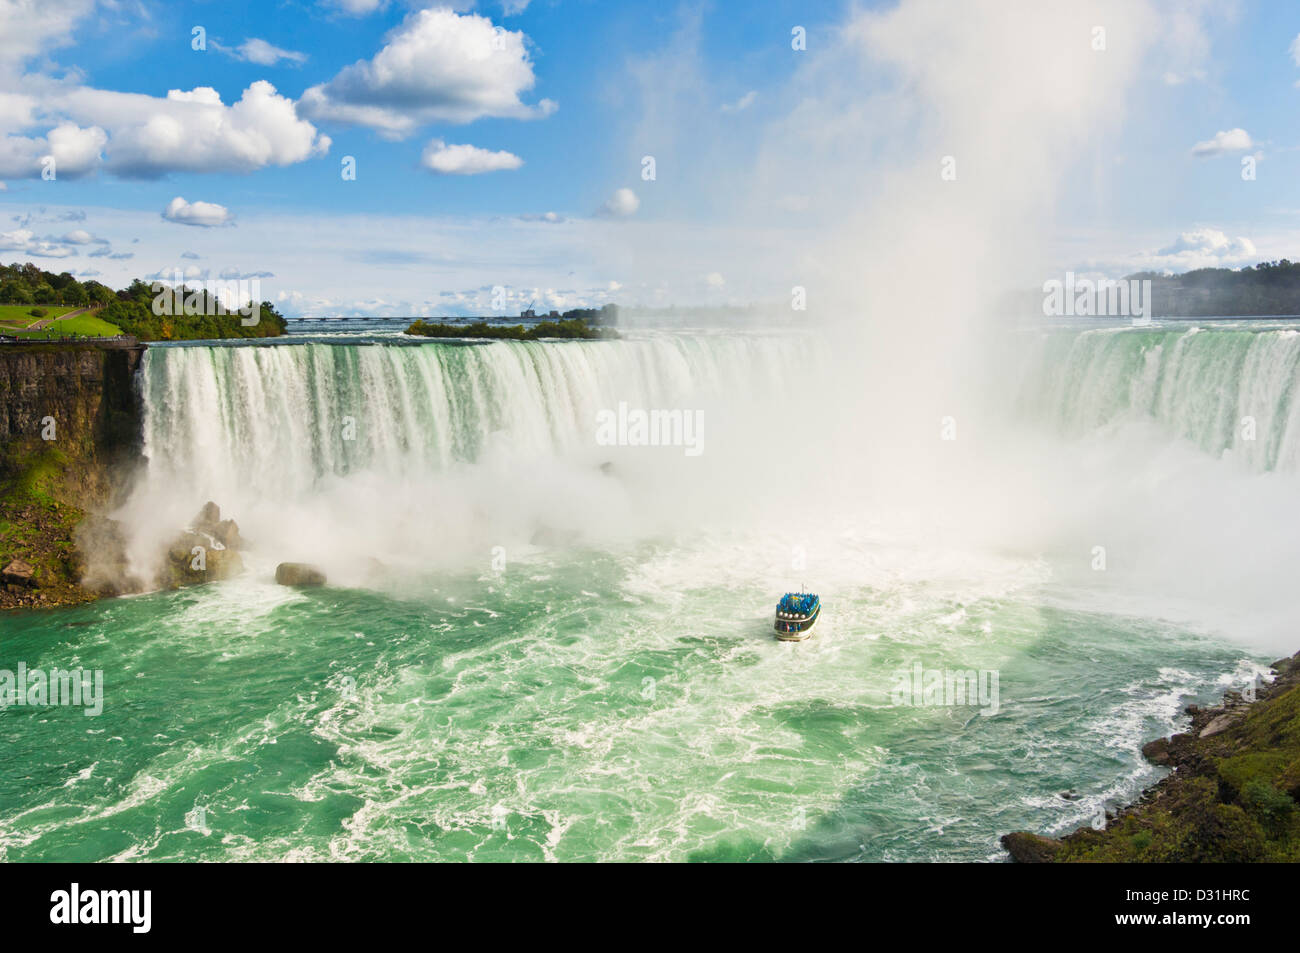 Maid of the mist boat cruise with tourists in blue raincoats Horseshoe falls on the Niagara river Ontario Canada Stock Photo